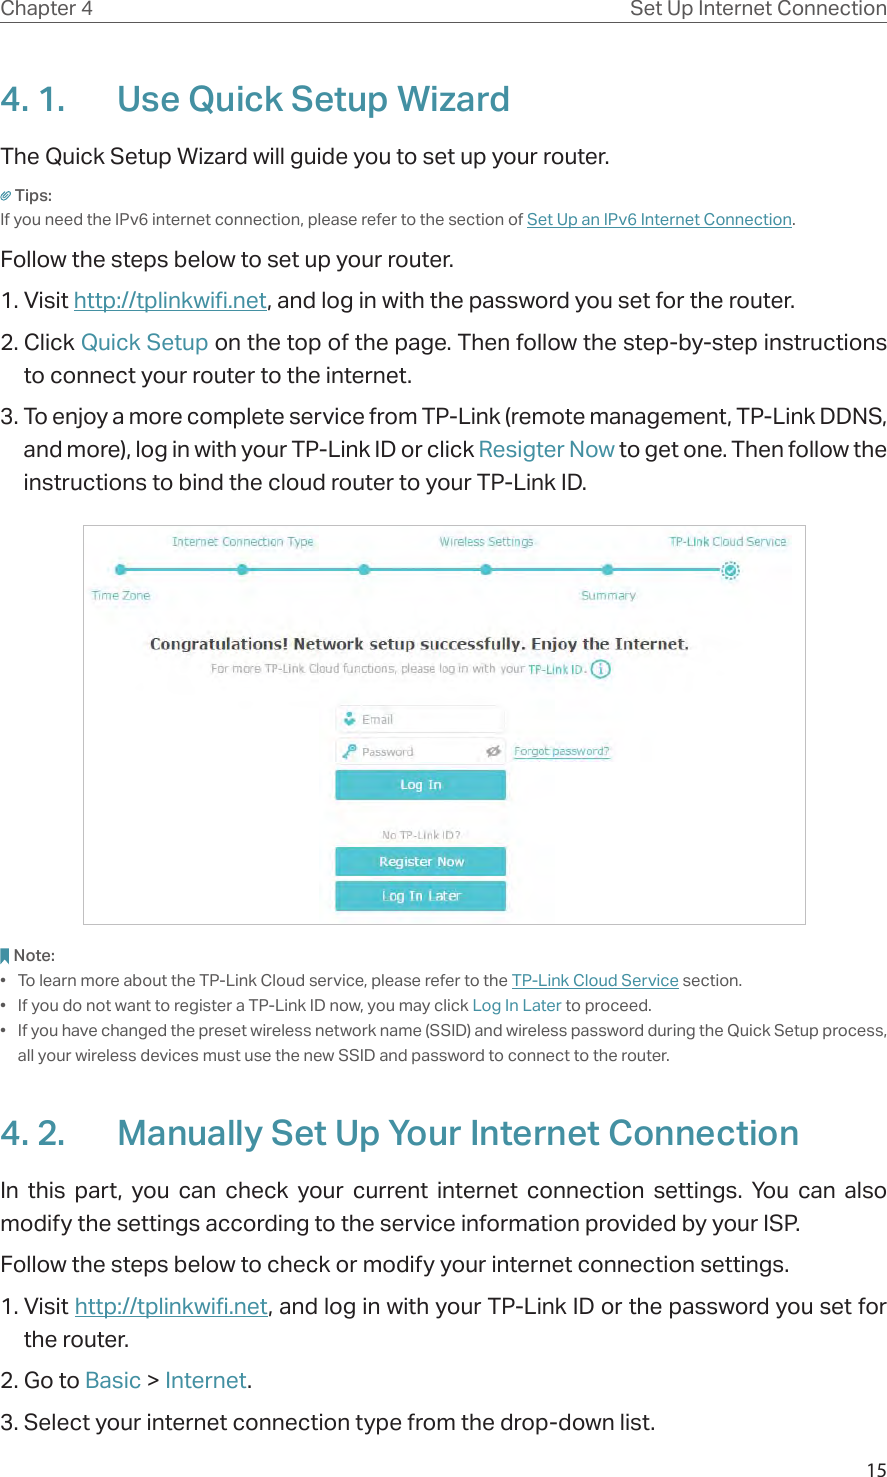 15Chapter 4 Set Up Internet Connection4. 1.  Use Quick Setup WizardThe Quick Setup Wizard will guide you to set up your router.Tips:If you need the IPv6 internet connection, please refer to the section of Set Up an IPv6 Internet Connection.Follow the steps below to set up your router.1. Visit http://tplinkwifi.net, and log in with the password you set for the router.2. Click Quick Setup on the top of the page. Then follow the step-by-step instructions to connect your router to the internet.3. To enjoy a more complete service from TP-Link (remote management, TP-Link DDNS, and more), log in with your TP-Link ID or click Resigter Now to get one. Then follow the instructions to bind the cloud router to your TP-Link ID.Note:•  To learn more about the TP-Link Cloud service, please refer to the TP-Link Cloud Service section.•  If you do not want to register a TP-Link ID now, you may click Log In Later to proceed.•  If you have changed the preset wireless network name (SSID) and wireless password during the Quick Setup process, all your wireless devices must use the new SSID and password to connect to the router.4. 2.  Manually Set Up Your Internet Connection In this part, you can check your current internet connection settings. You can also modify the settings according to the service information provided by your ISP.Follow the steps below to check or modify your internet connection settings.1. Visit http://tplinkwifi.net, and log in with your TP-Link ID or the password you set for the router.2. Go to Basic &gt; Internet.3. Select your internet connection type from the drop-down list. 